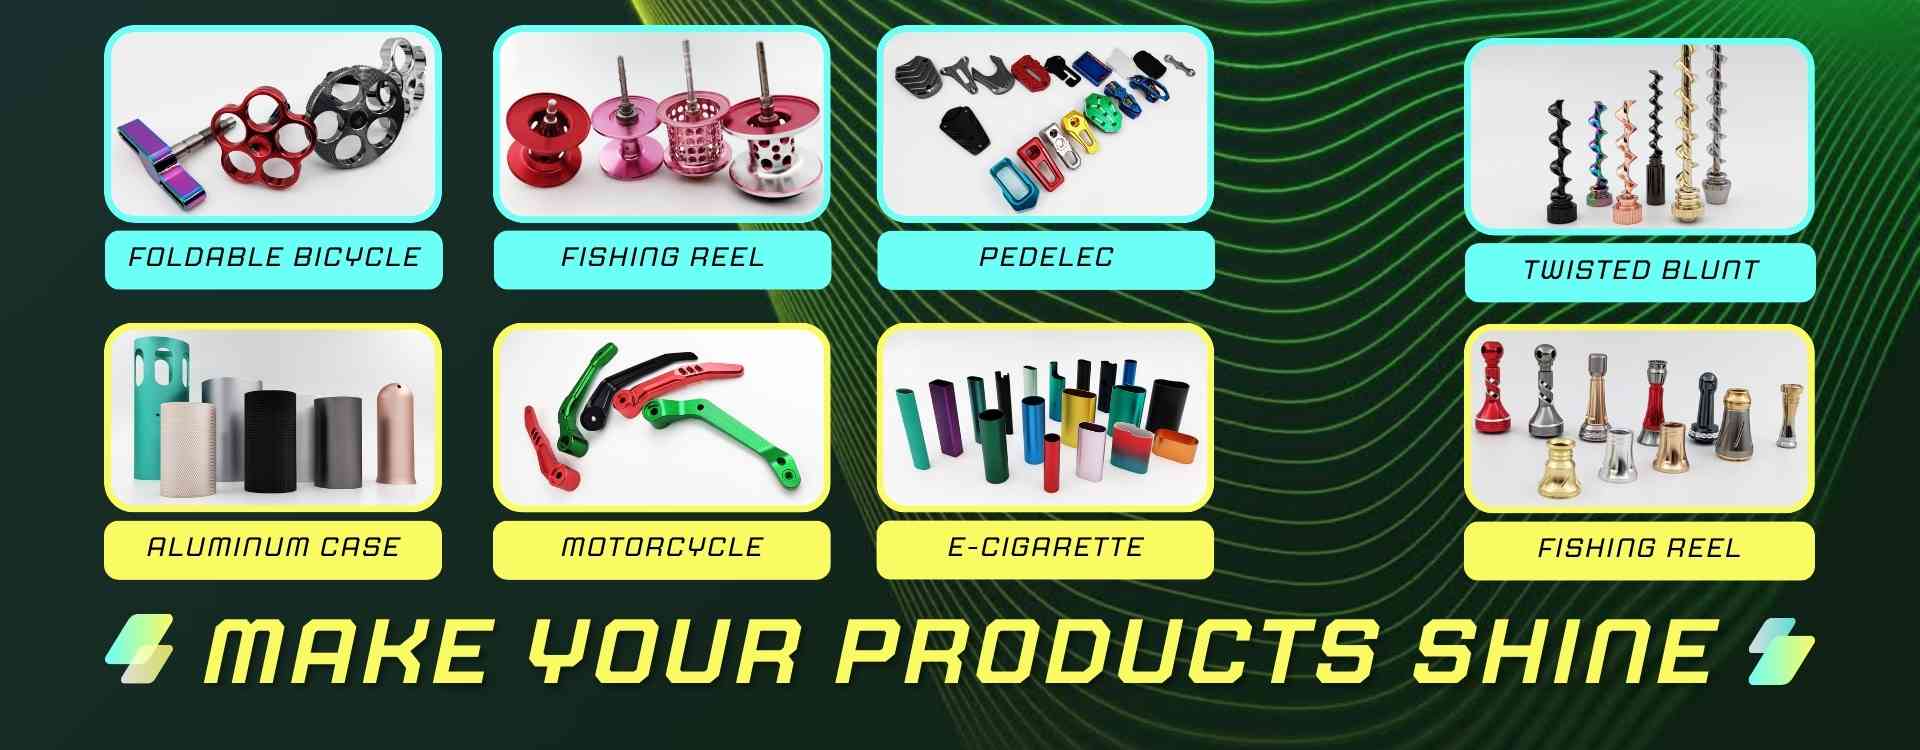 We specialize in manufacturing metal appearance parts. We use advanced surface treatment processes such as PVD, anodizing, vacuum electroplating, painting, wire drawing and polishing to make your metal parts colorful and shiny.